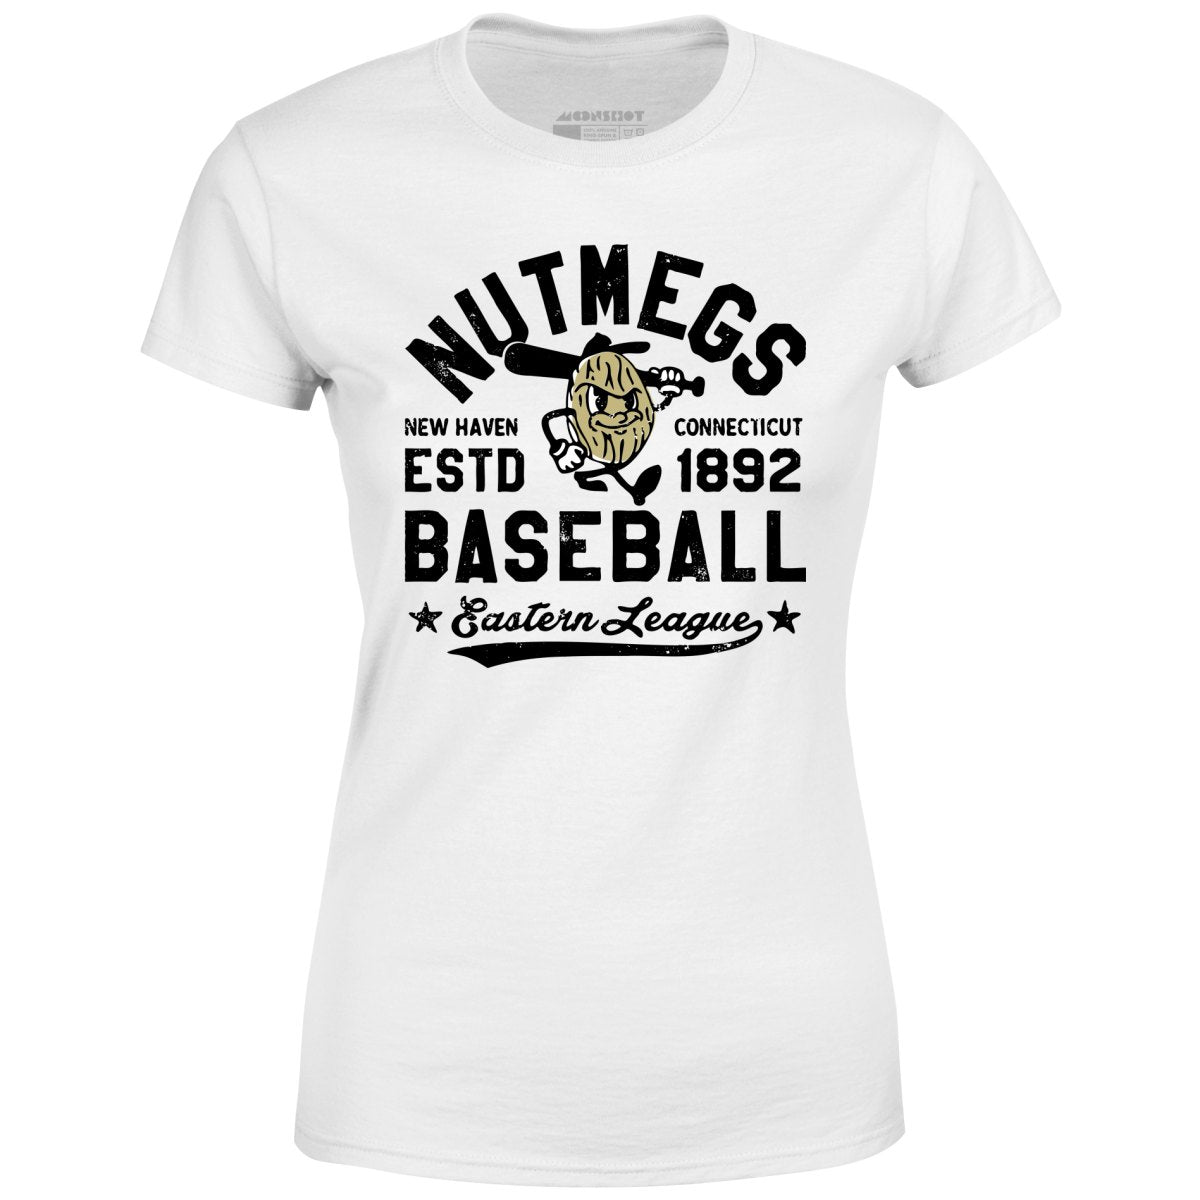 New Haven Nutmegs - Connecticut - Vintage Defunct Baseball Teams - Women's T-Shirt